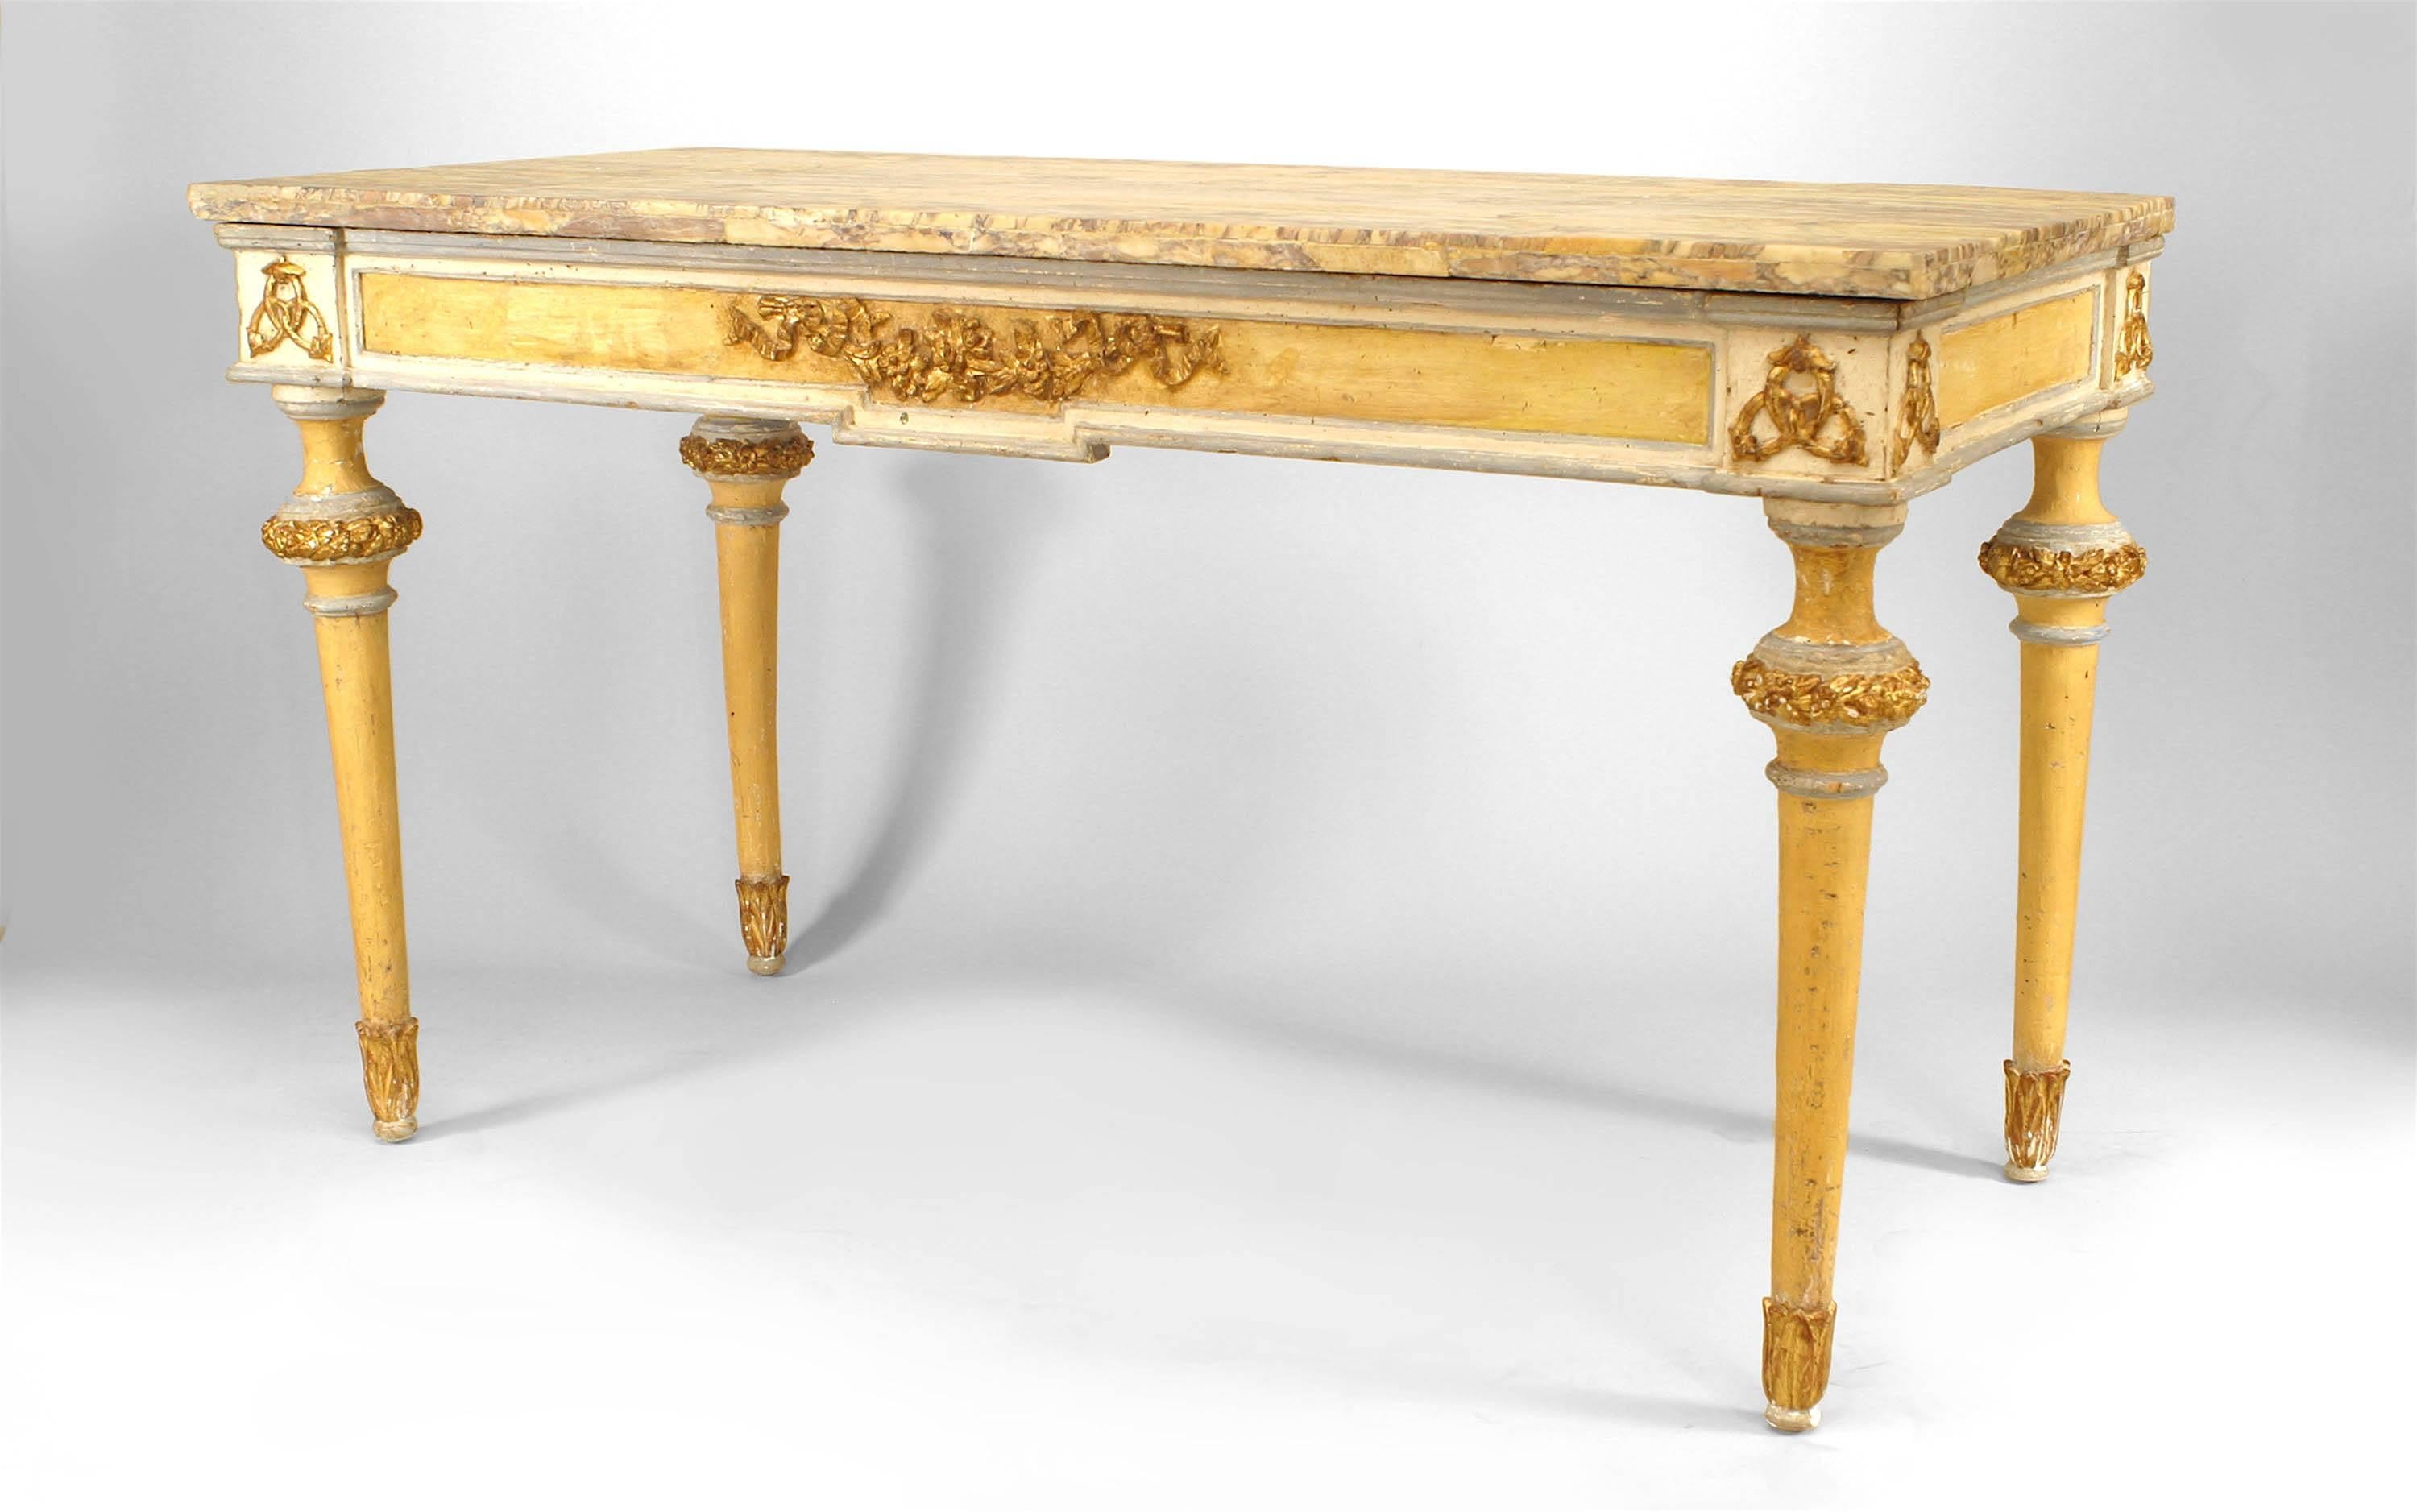 Italian Neoclassic yellow painted and gilt trimmed console table featuring a marble top, a central gilt floral motif flanking interlocking oval mounts, and tapered round legs.